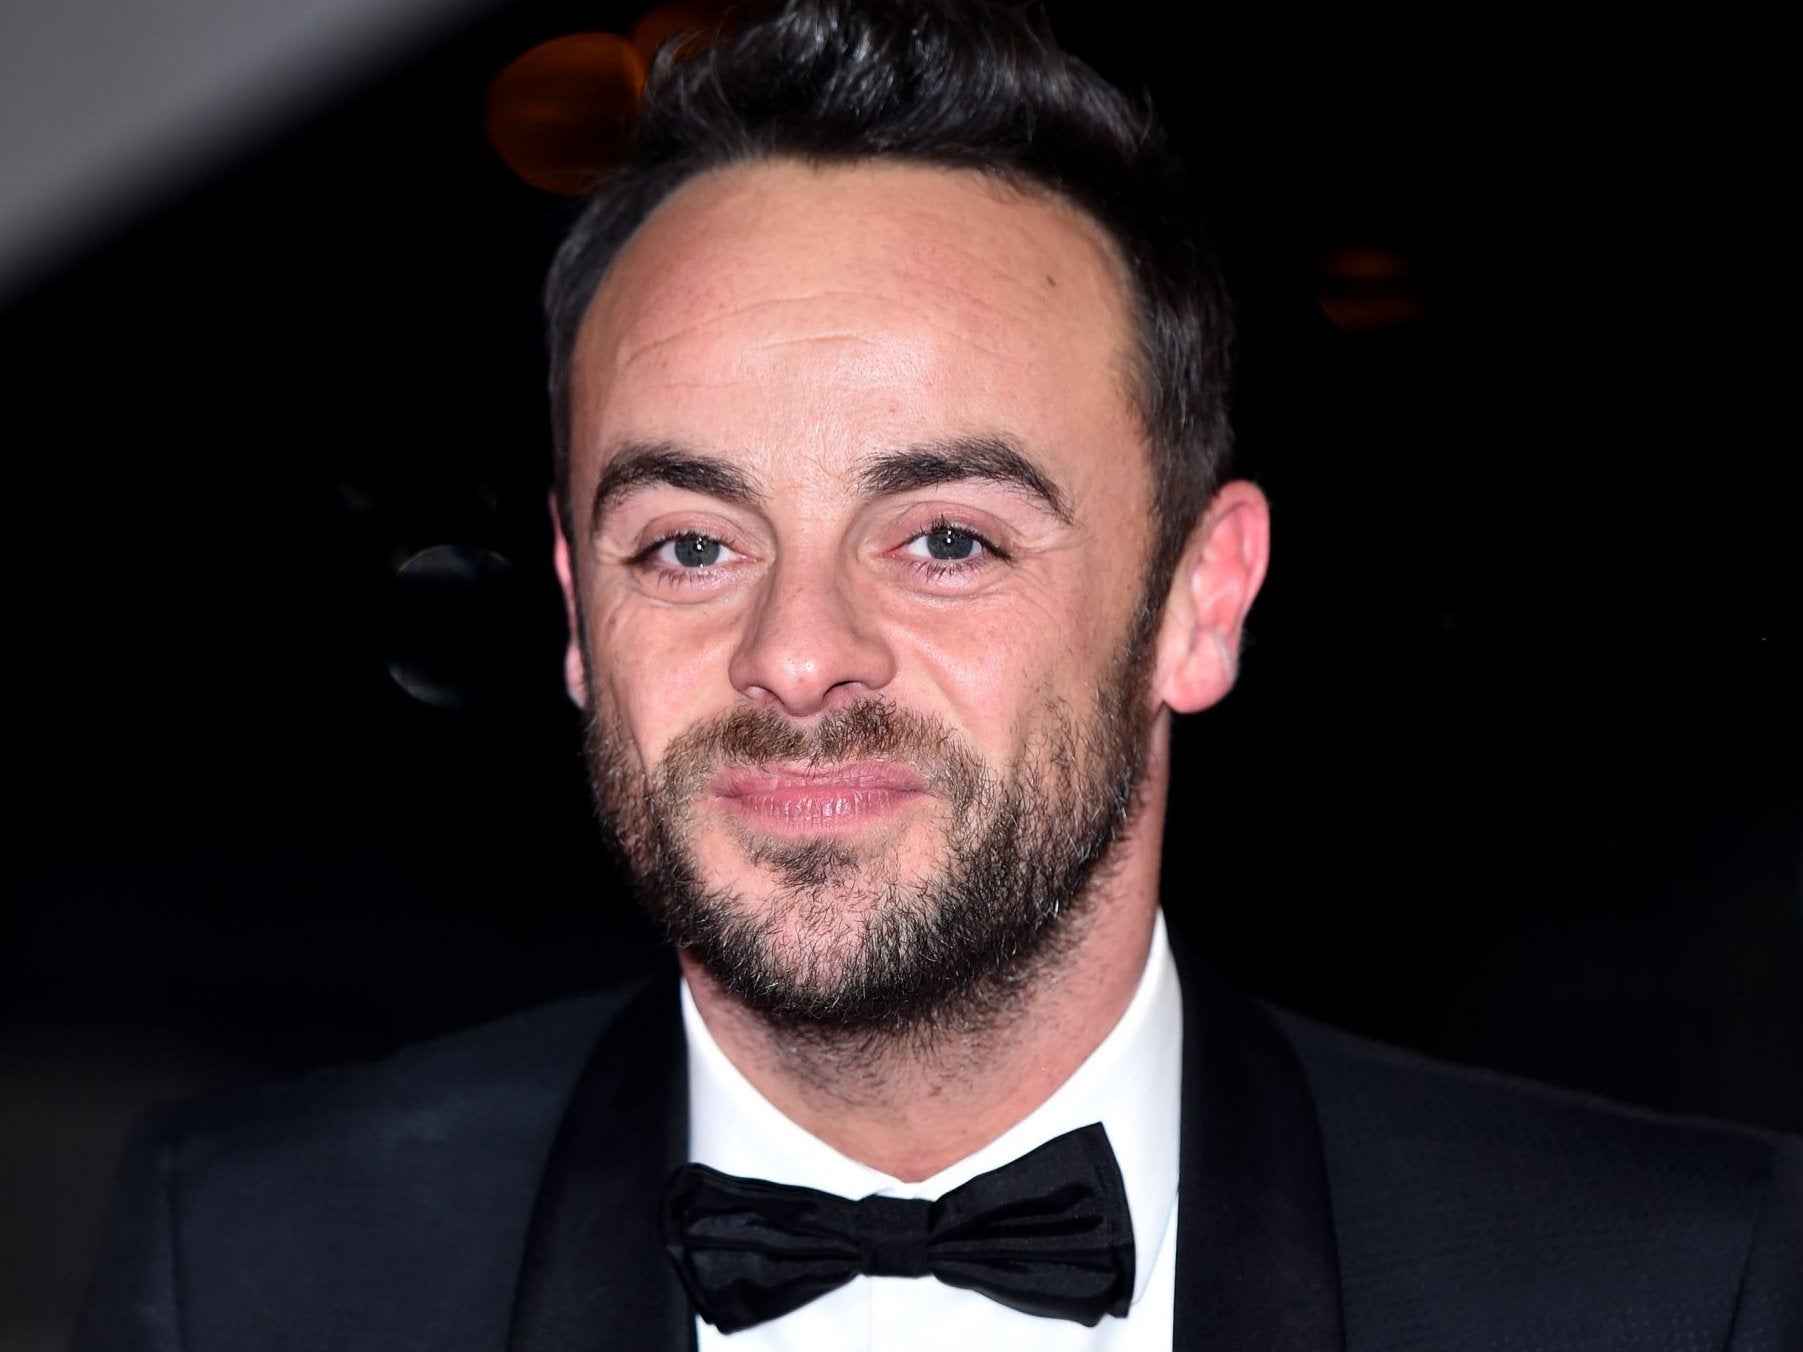 ITV's new boss has said Mr McPartlin will return to the channel when he is 'well and ready to come back'.